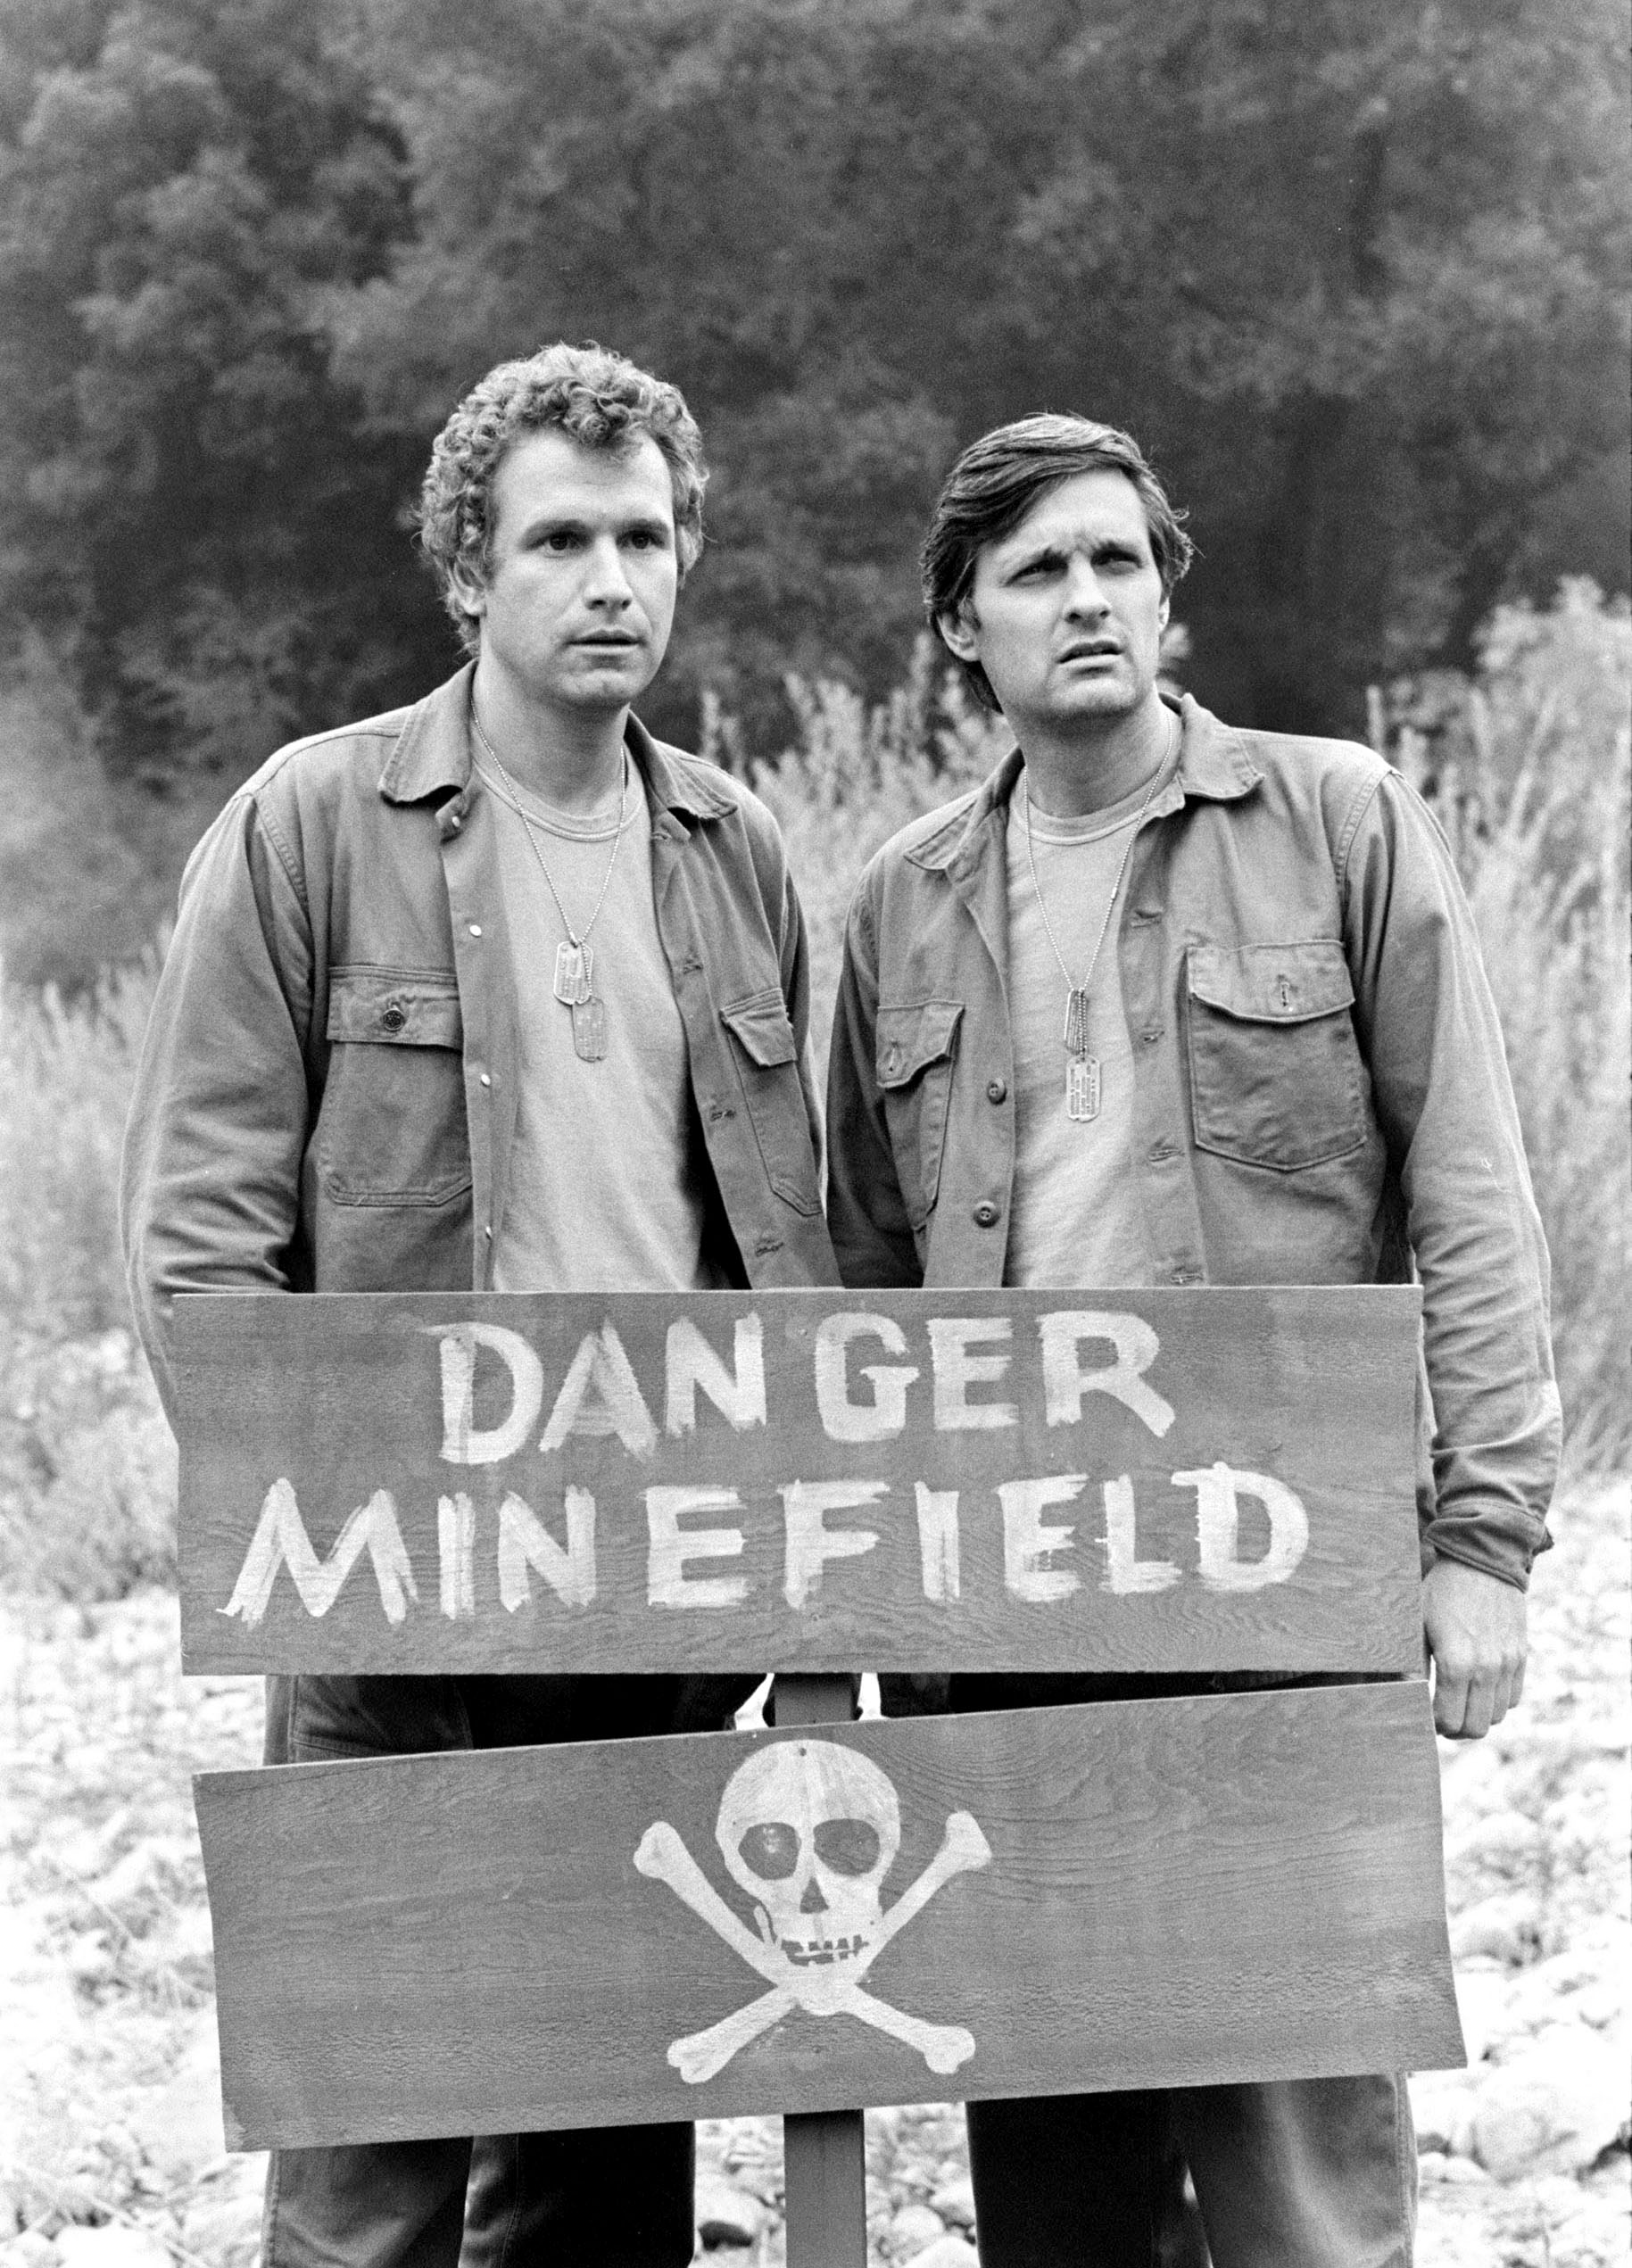   Alan Alda and Wayne Roger in a scene from the 'Kim' episode of the CBS television series "MASH" (M*A*S*H*)on October 20, 1973, in Los Angeles.  | Source: Getty Images